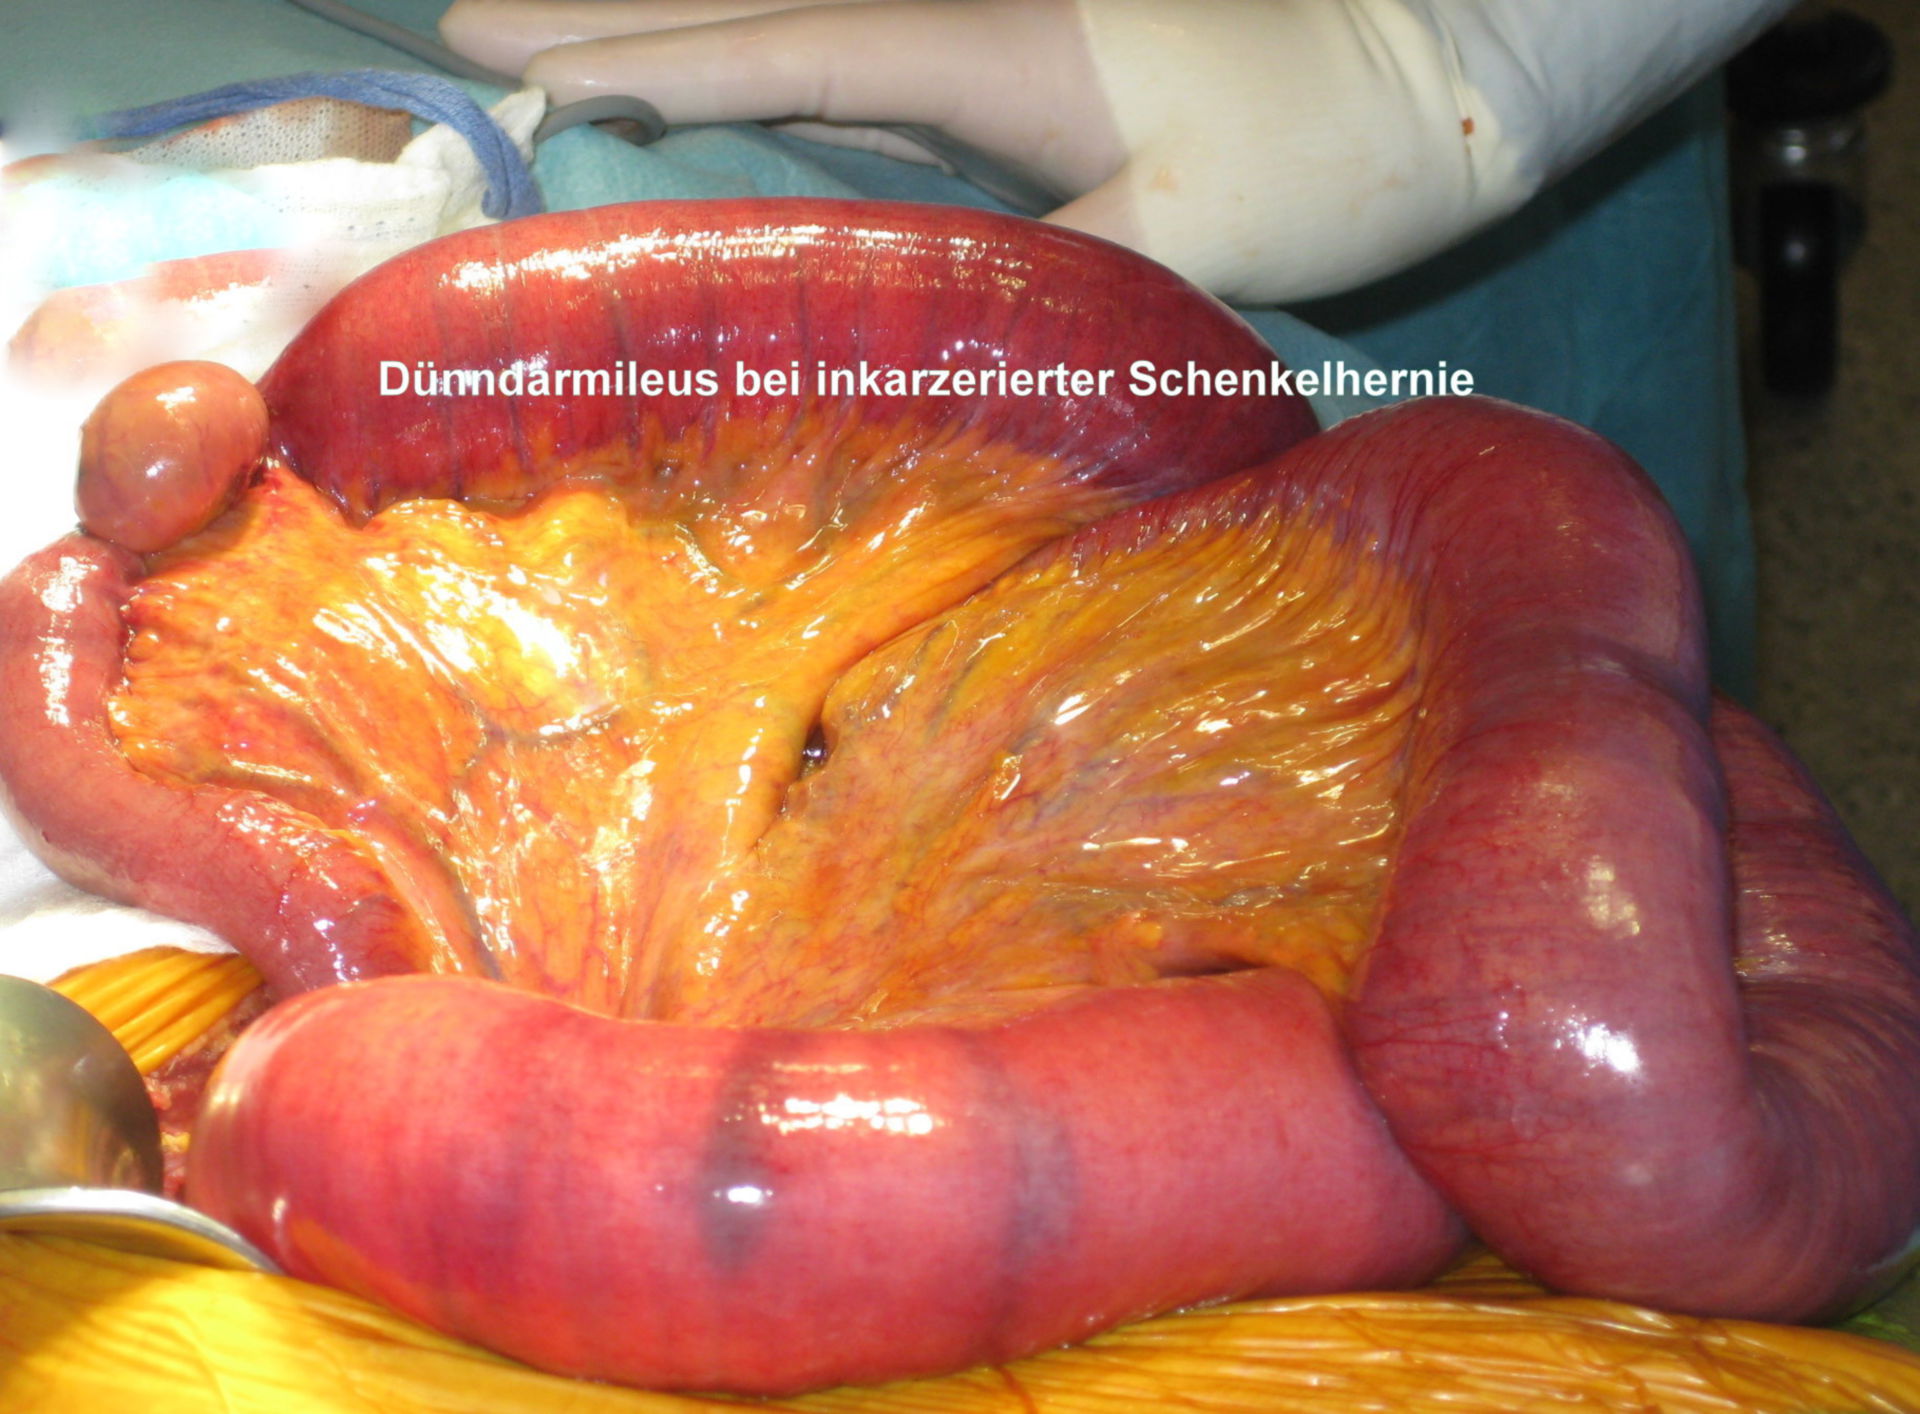 Small bowel obstruction upon incarcerated femoral hernia